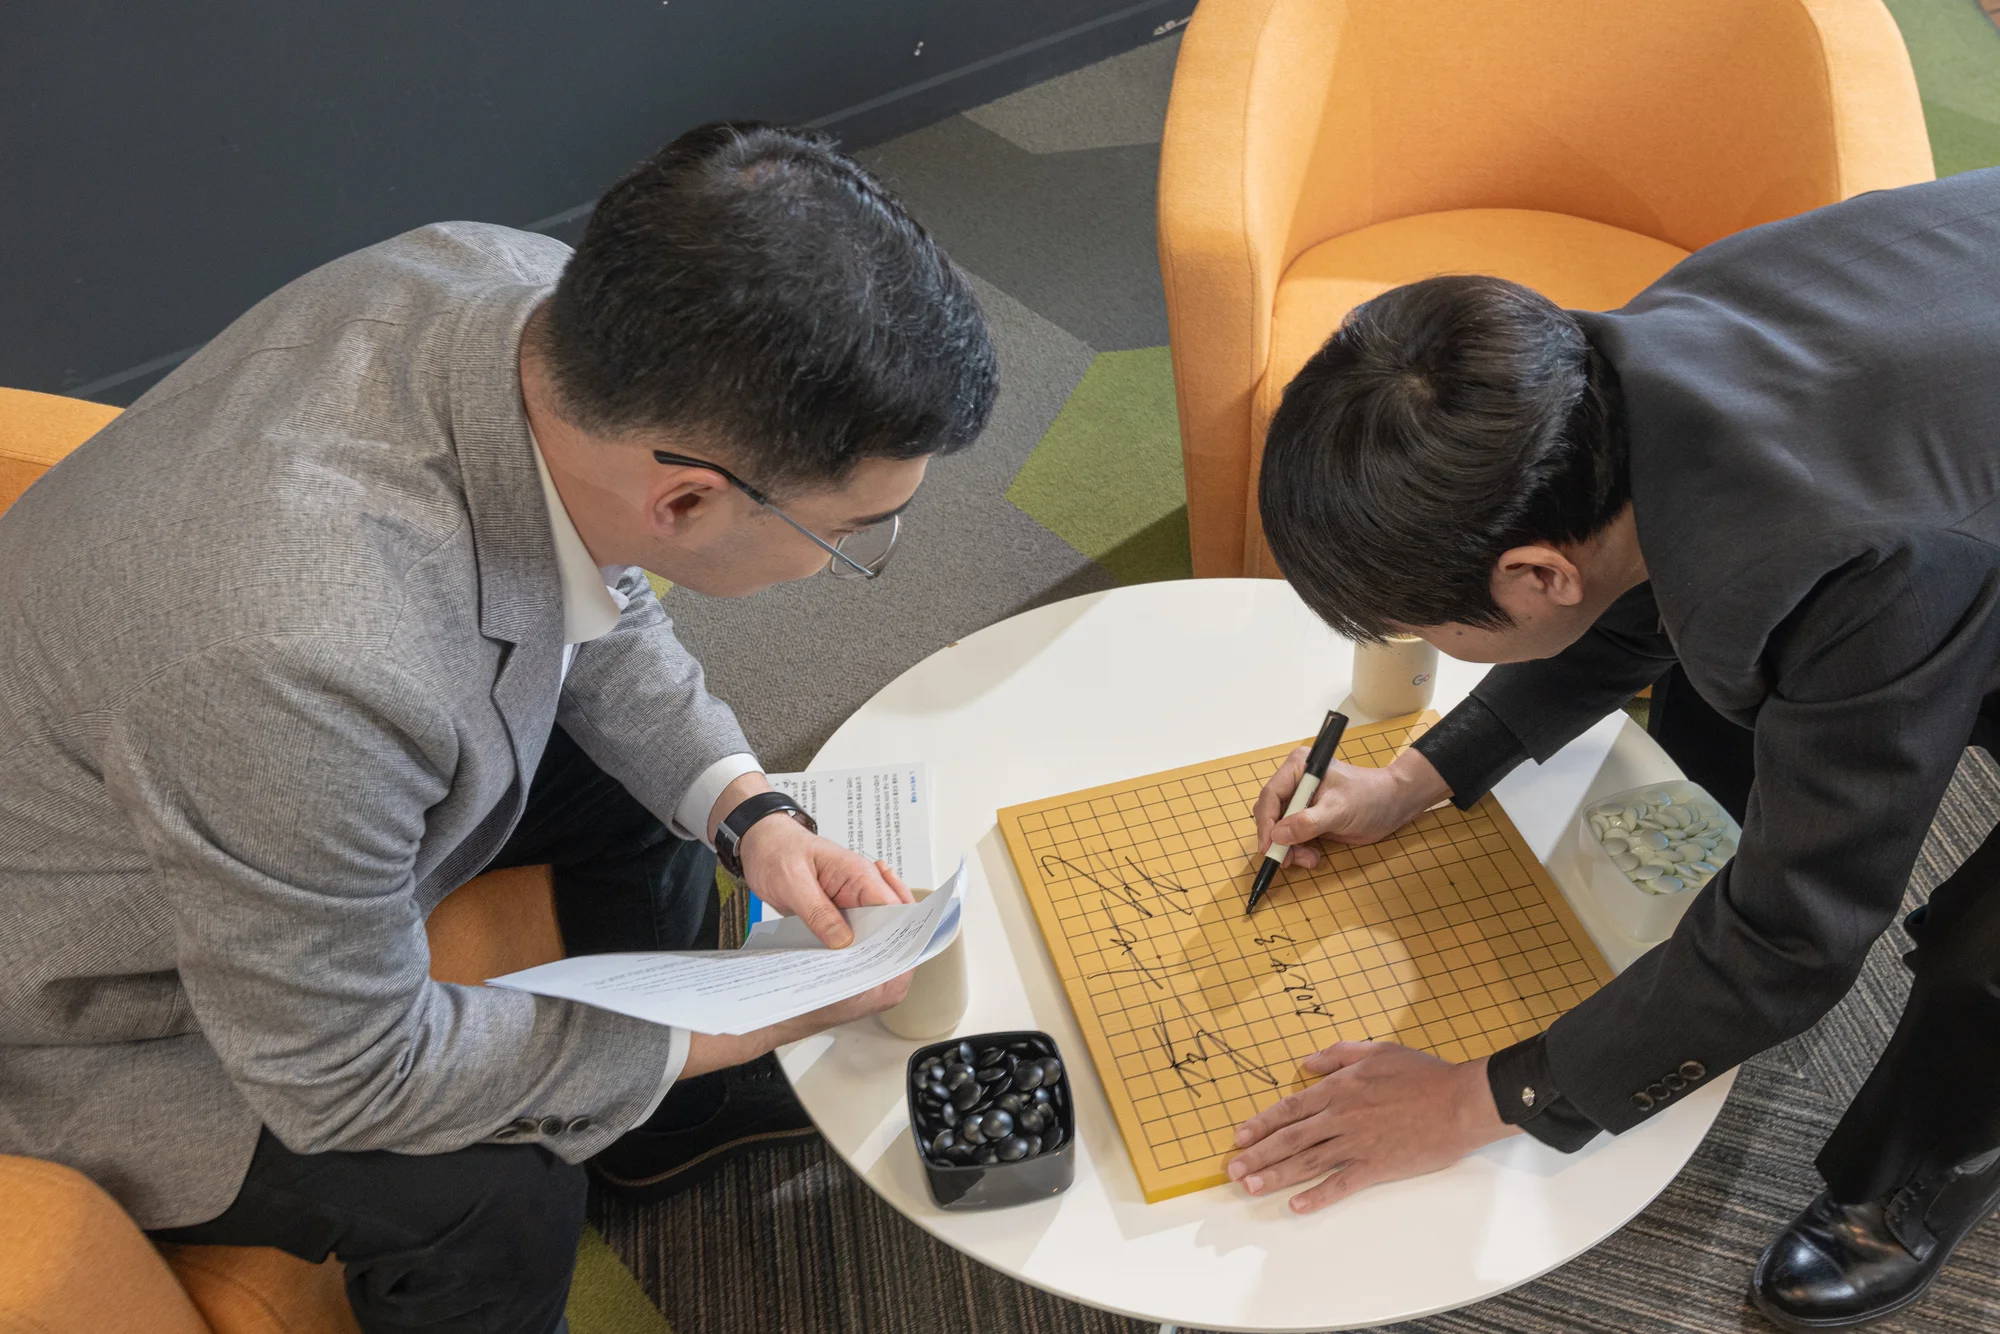 a birds eye view of two people sitting at a white table wearing grey suits. One person holds papers in his hand while the other writes on a wooden square board with a marker.